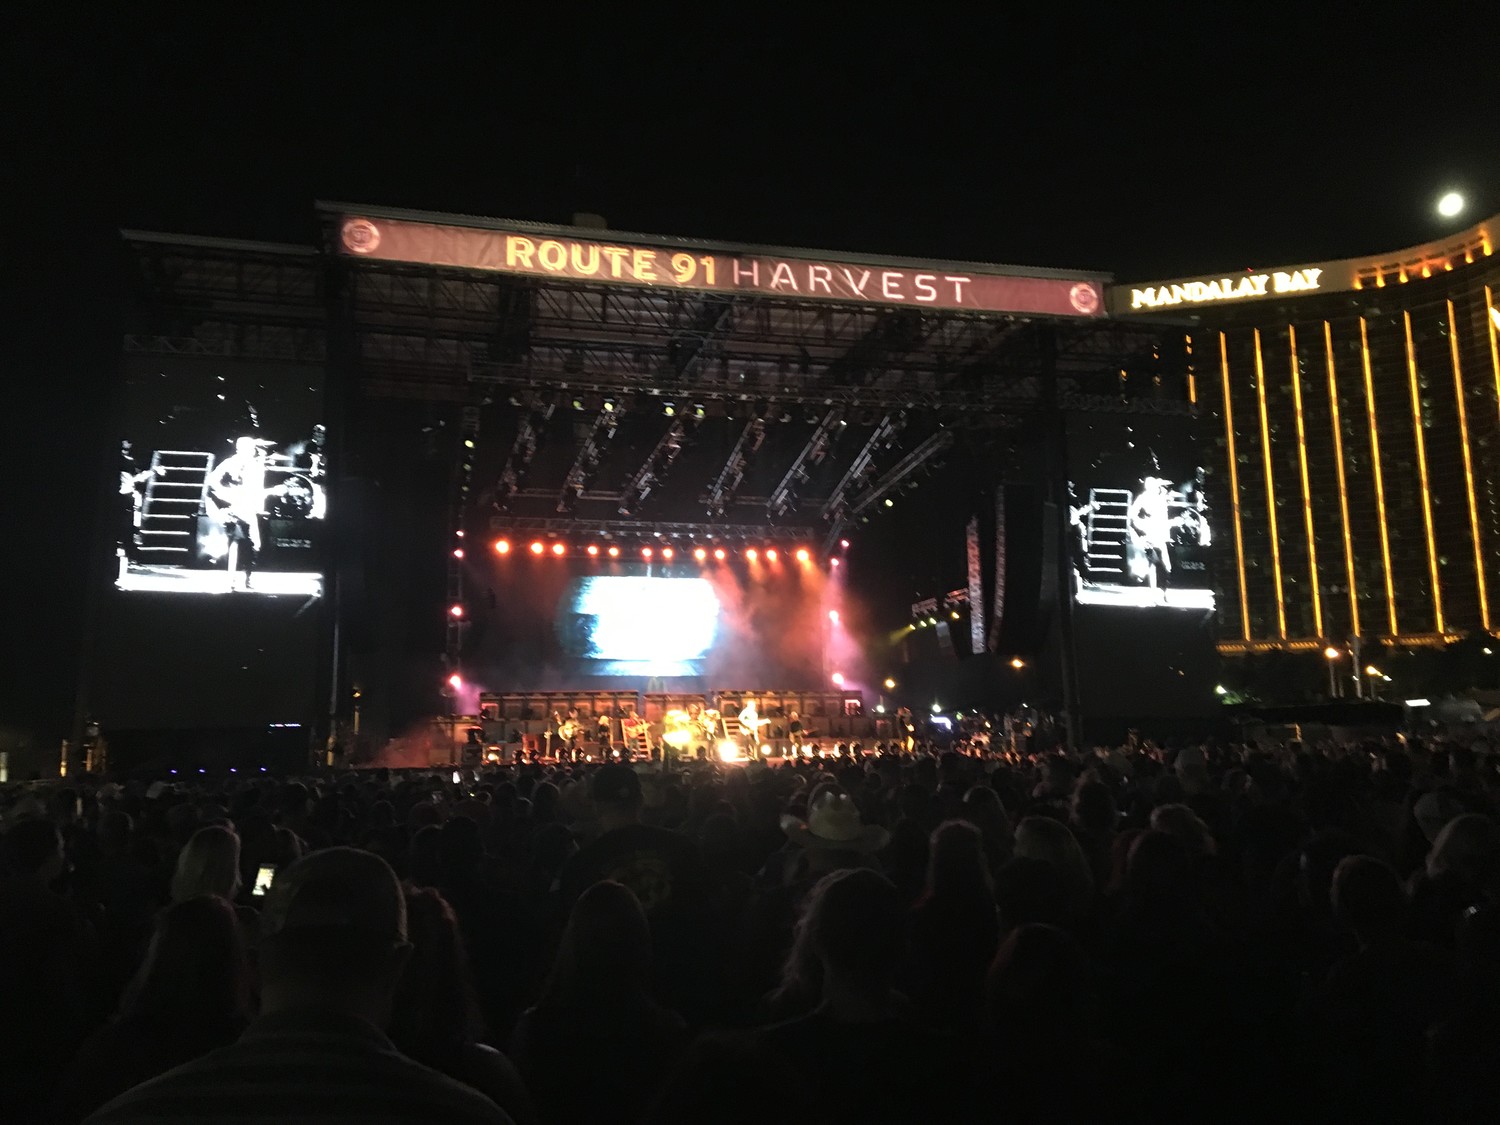 Country music star Jason Aldean's performance at the Route 91 Harvest Festival in Las Vegas on Sunday night became the scene of the deadliest mass shooting in U.S. history. In the crowd was 24-year-old Rockville Centre native Peter Meehan. Above, the concert venue last Friday.